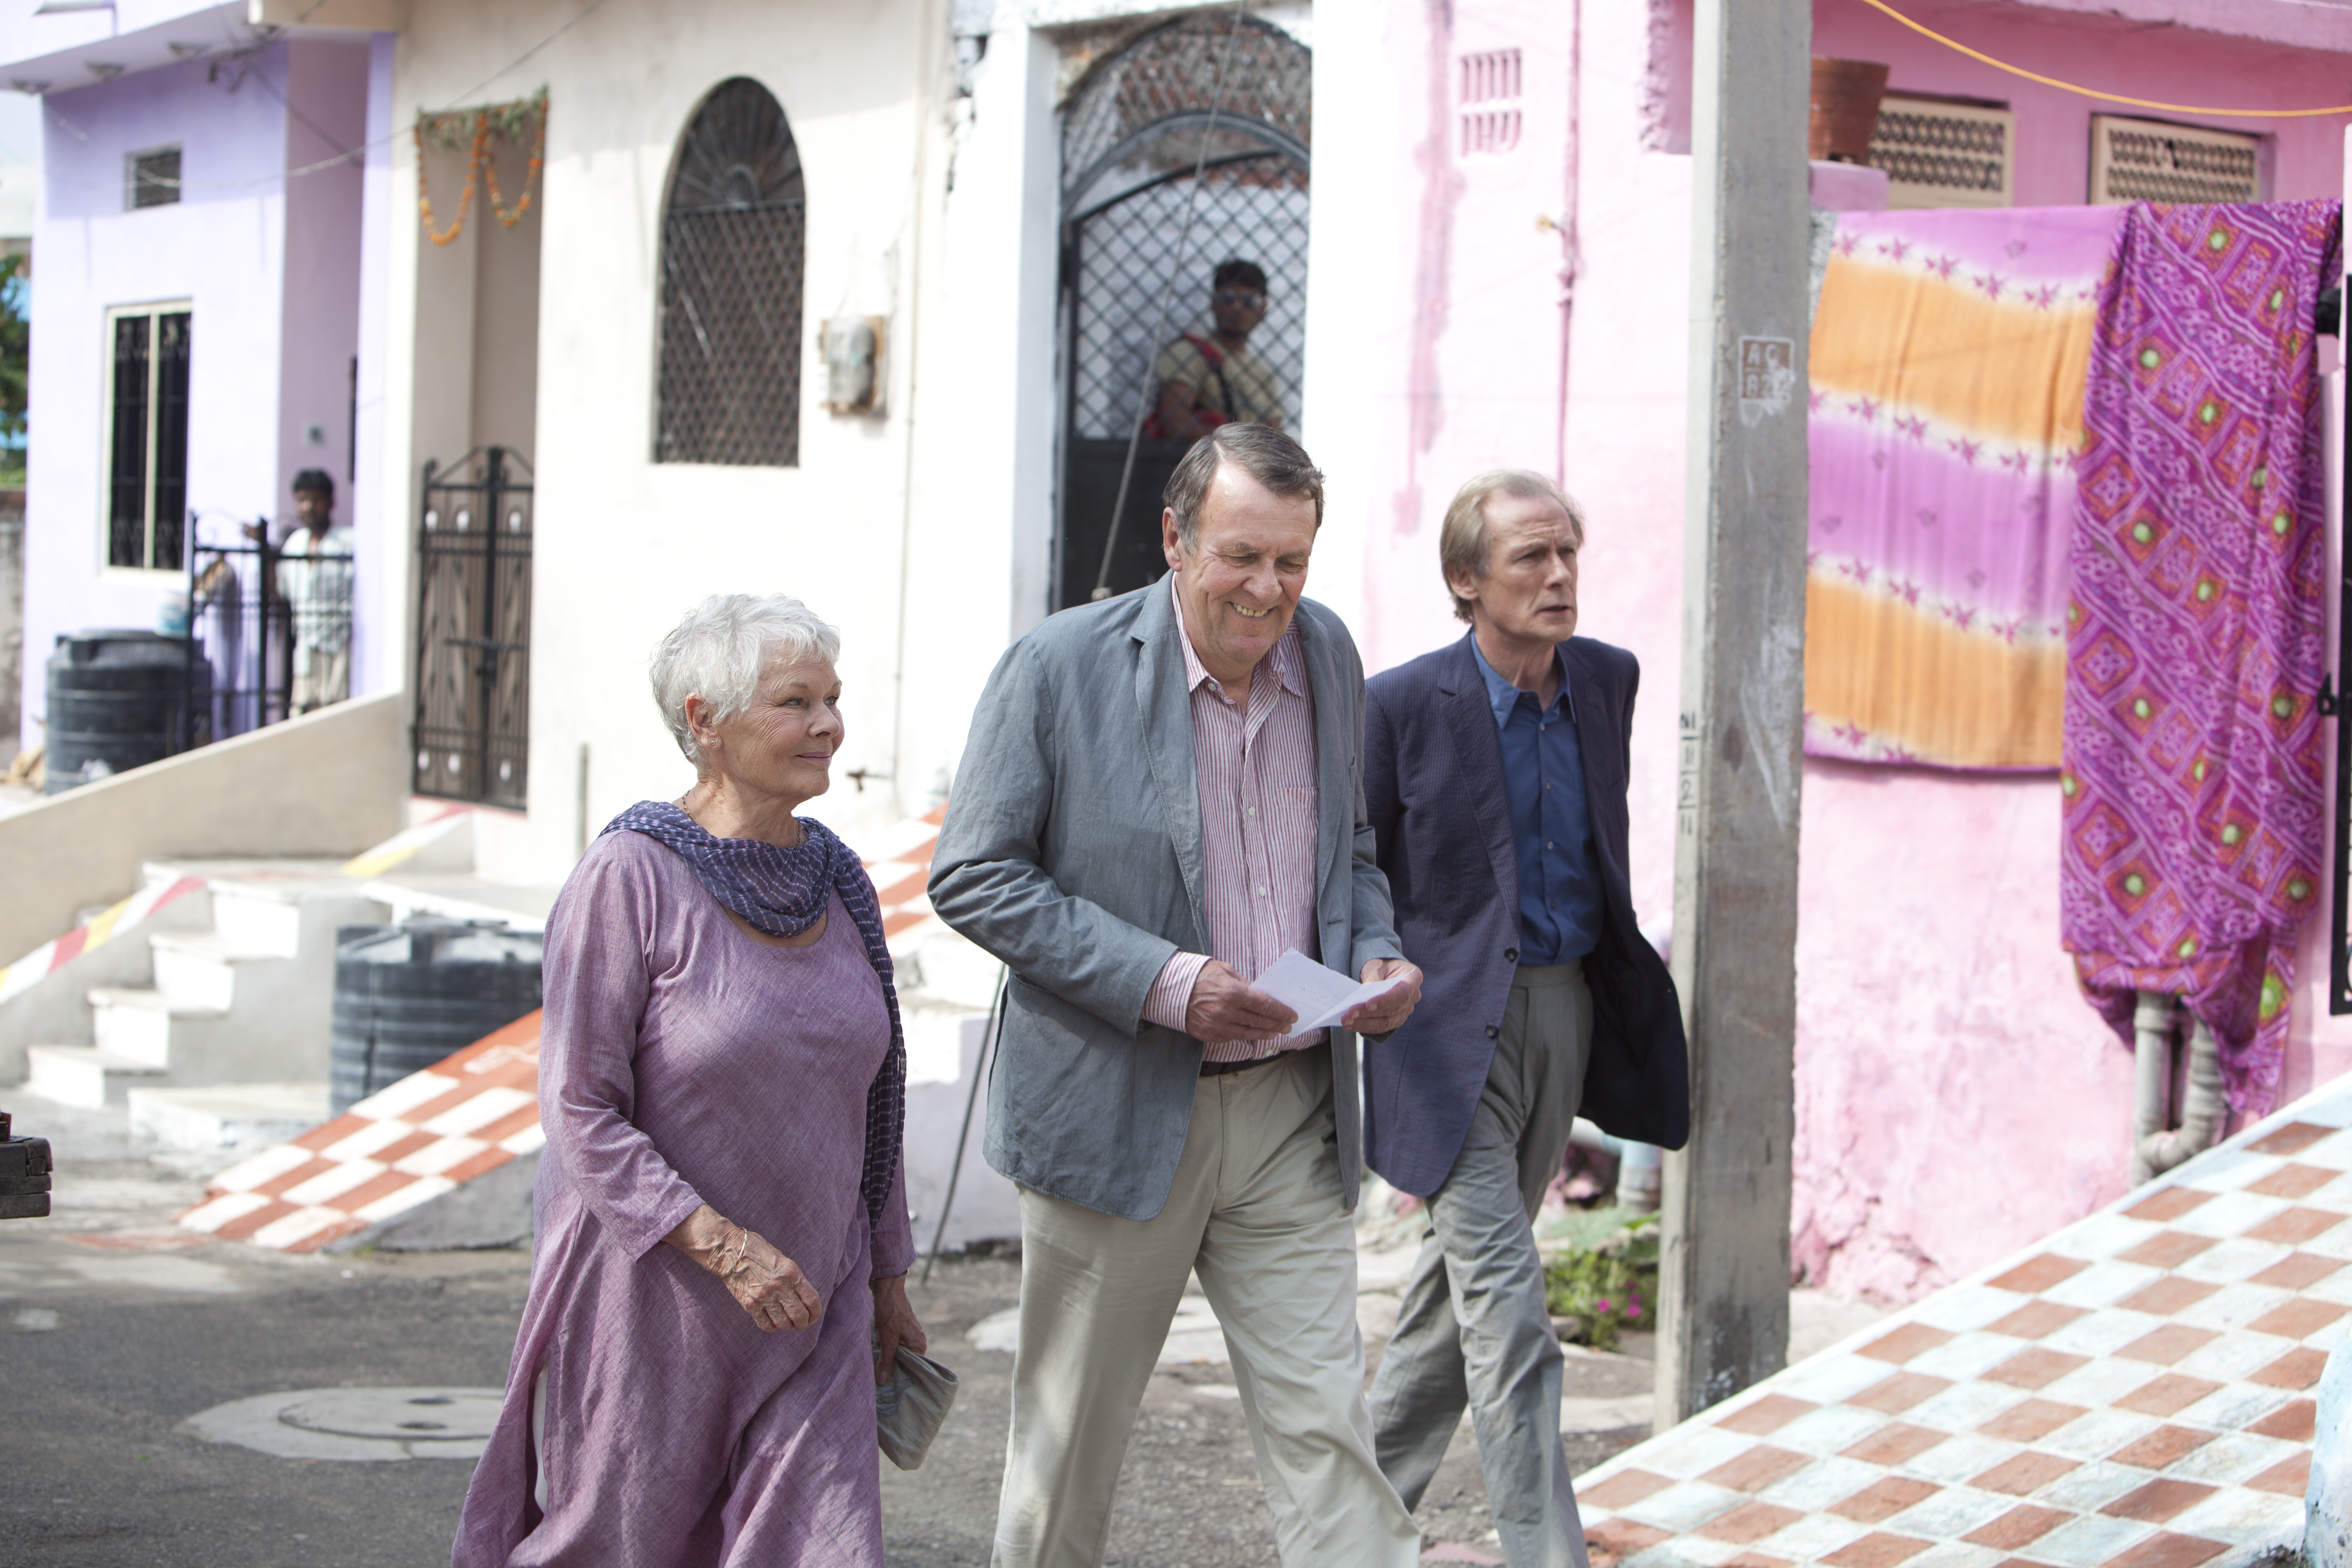 'The Best Exotic Marigold Hotel' Blu-ray Review: Seniors Seek Second Act in India